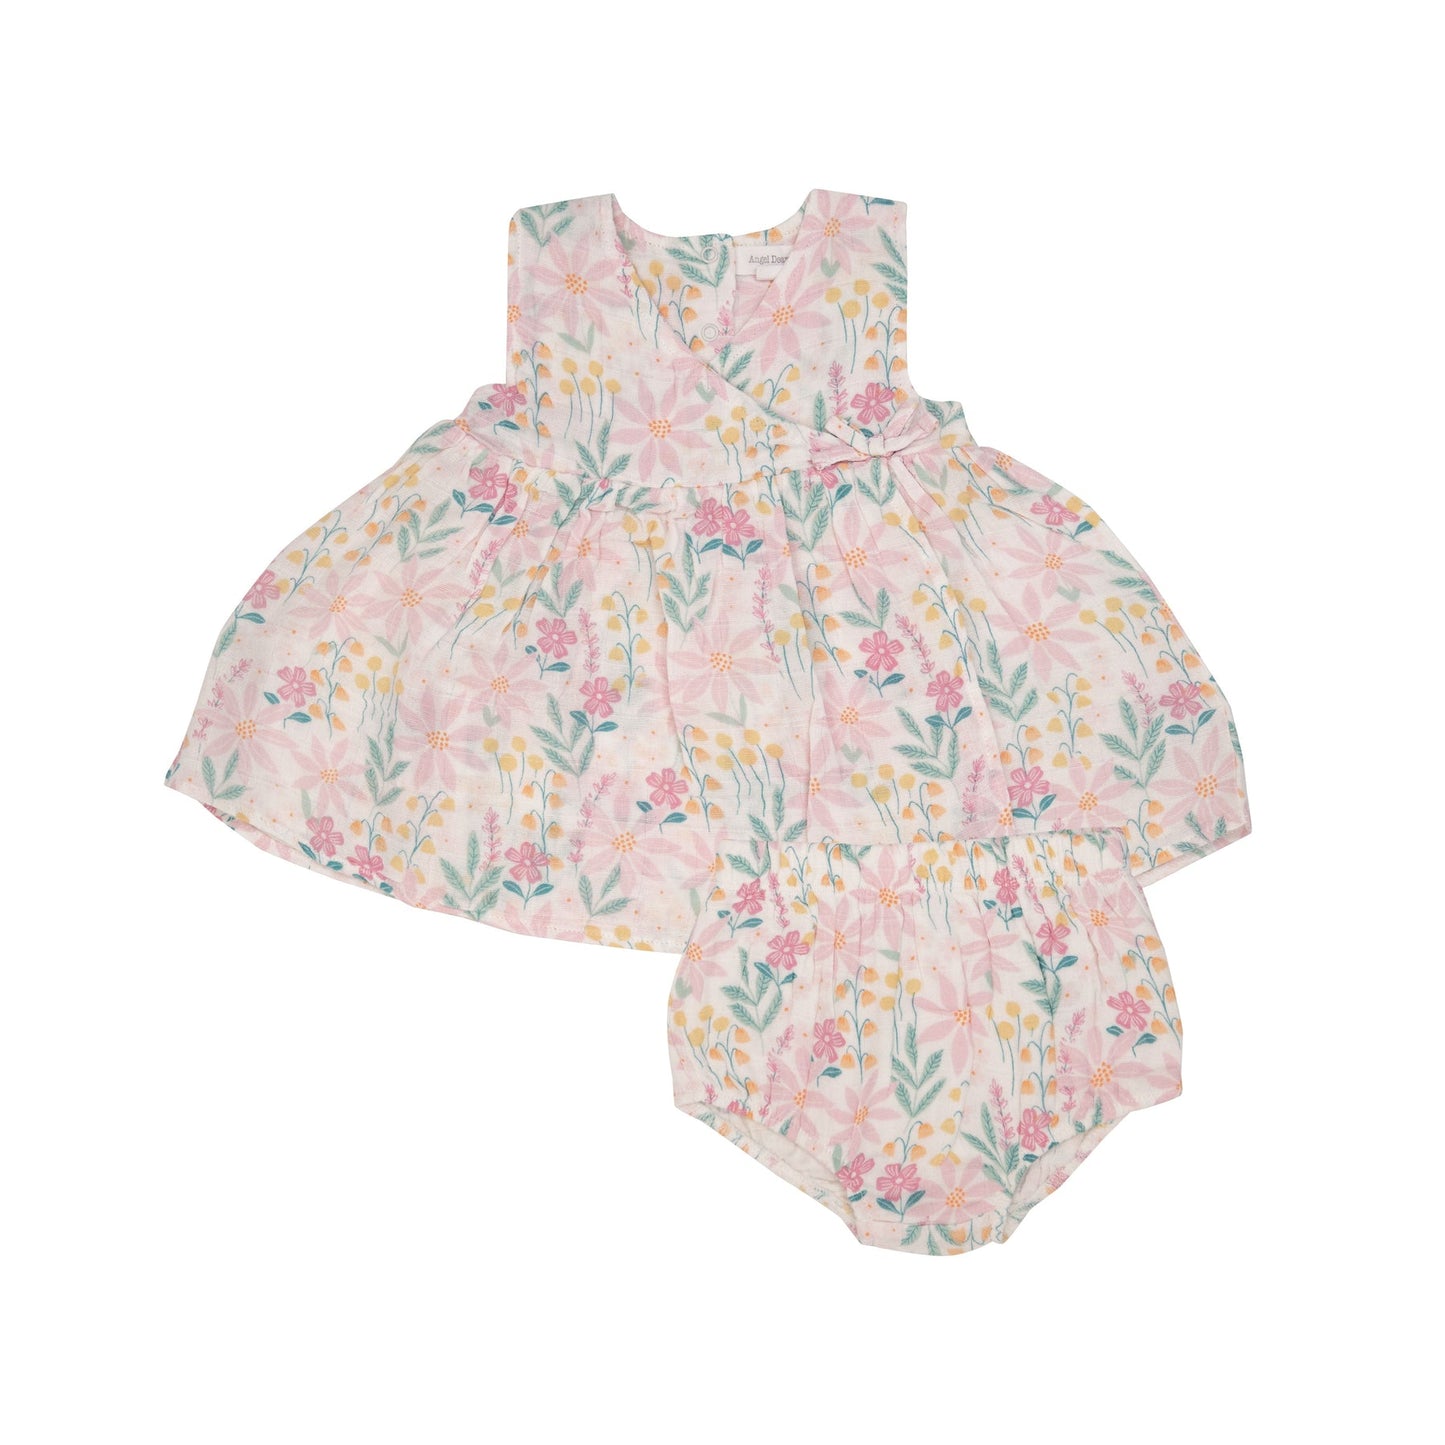 Pinwheel Floral Dress and Diaper Cover